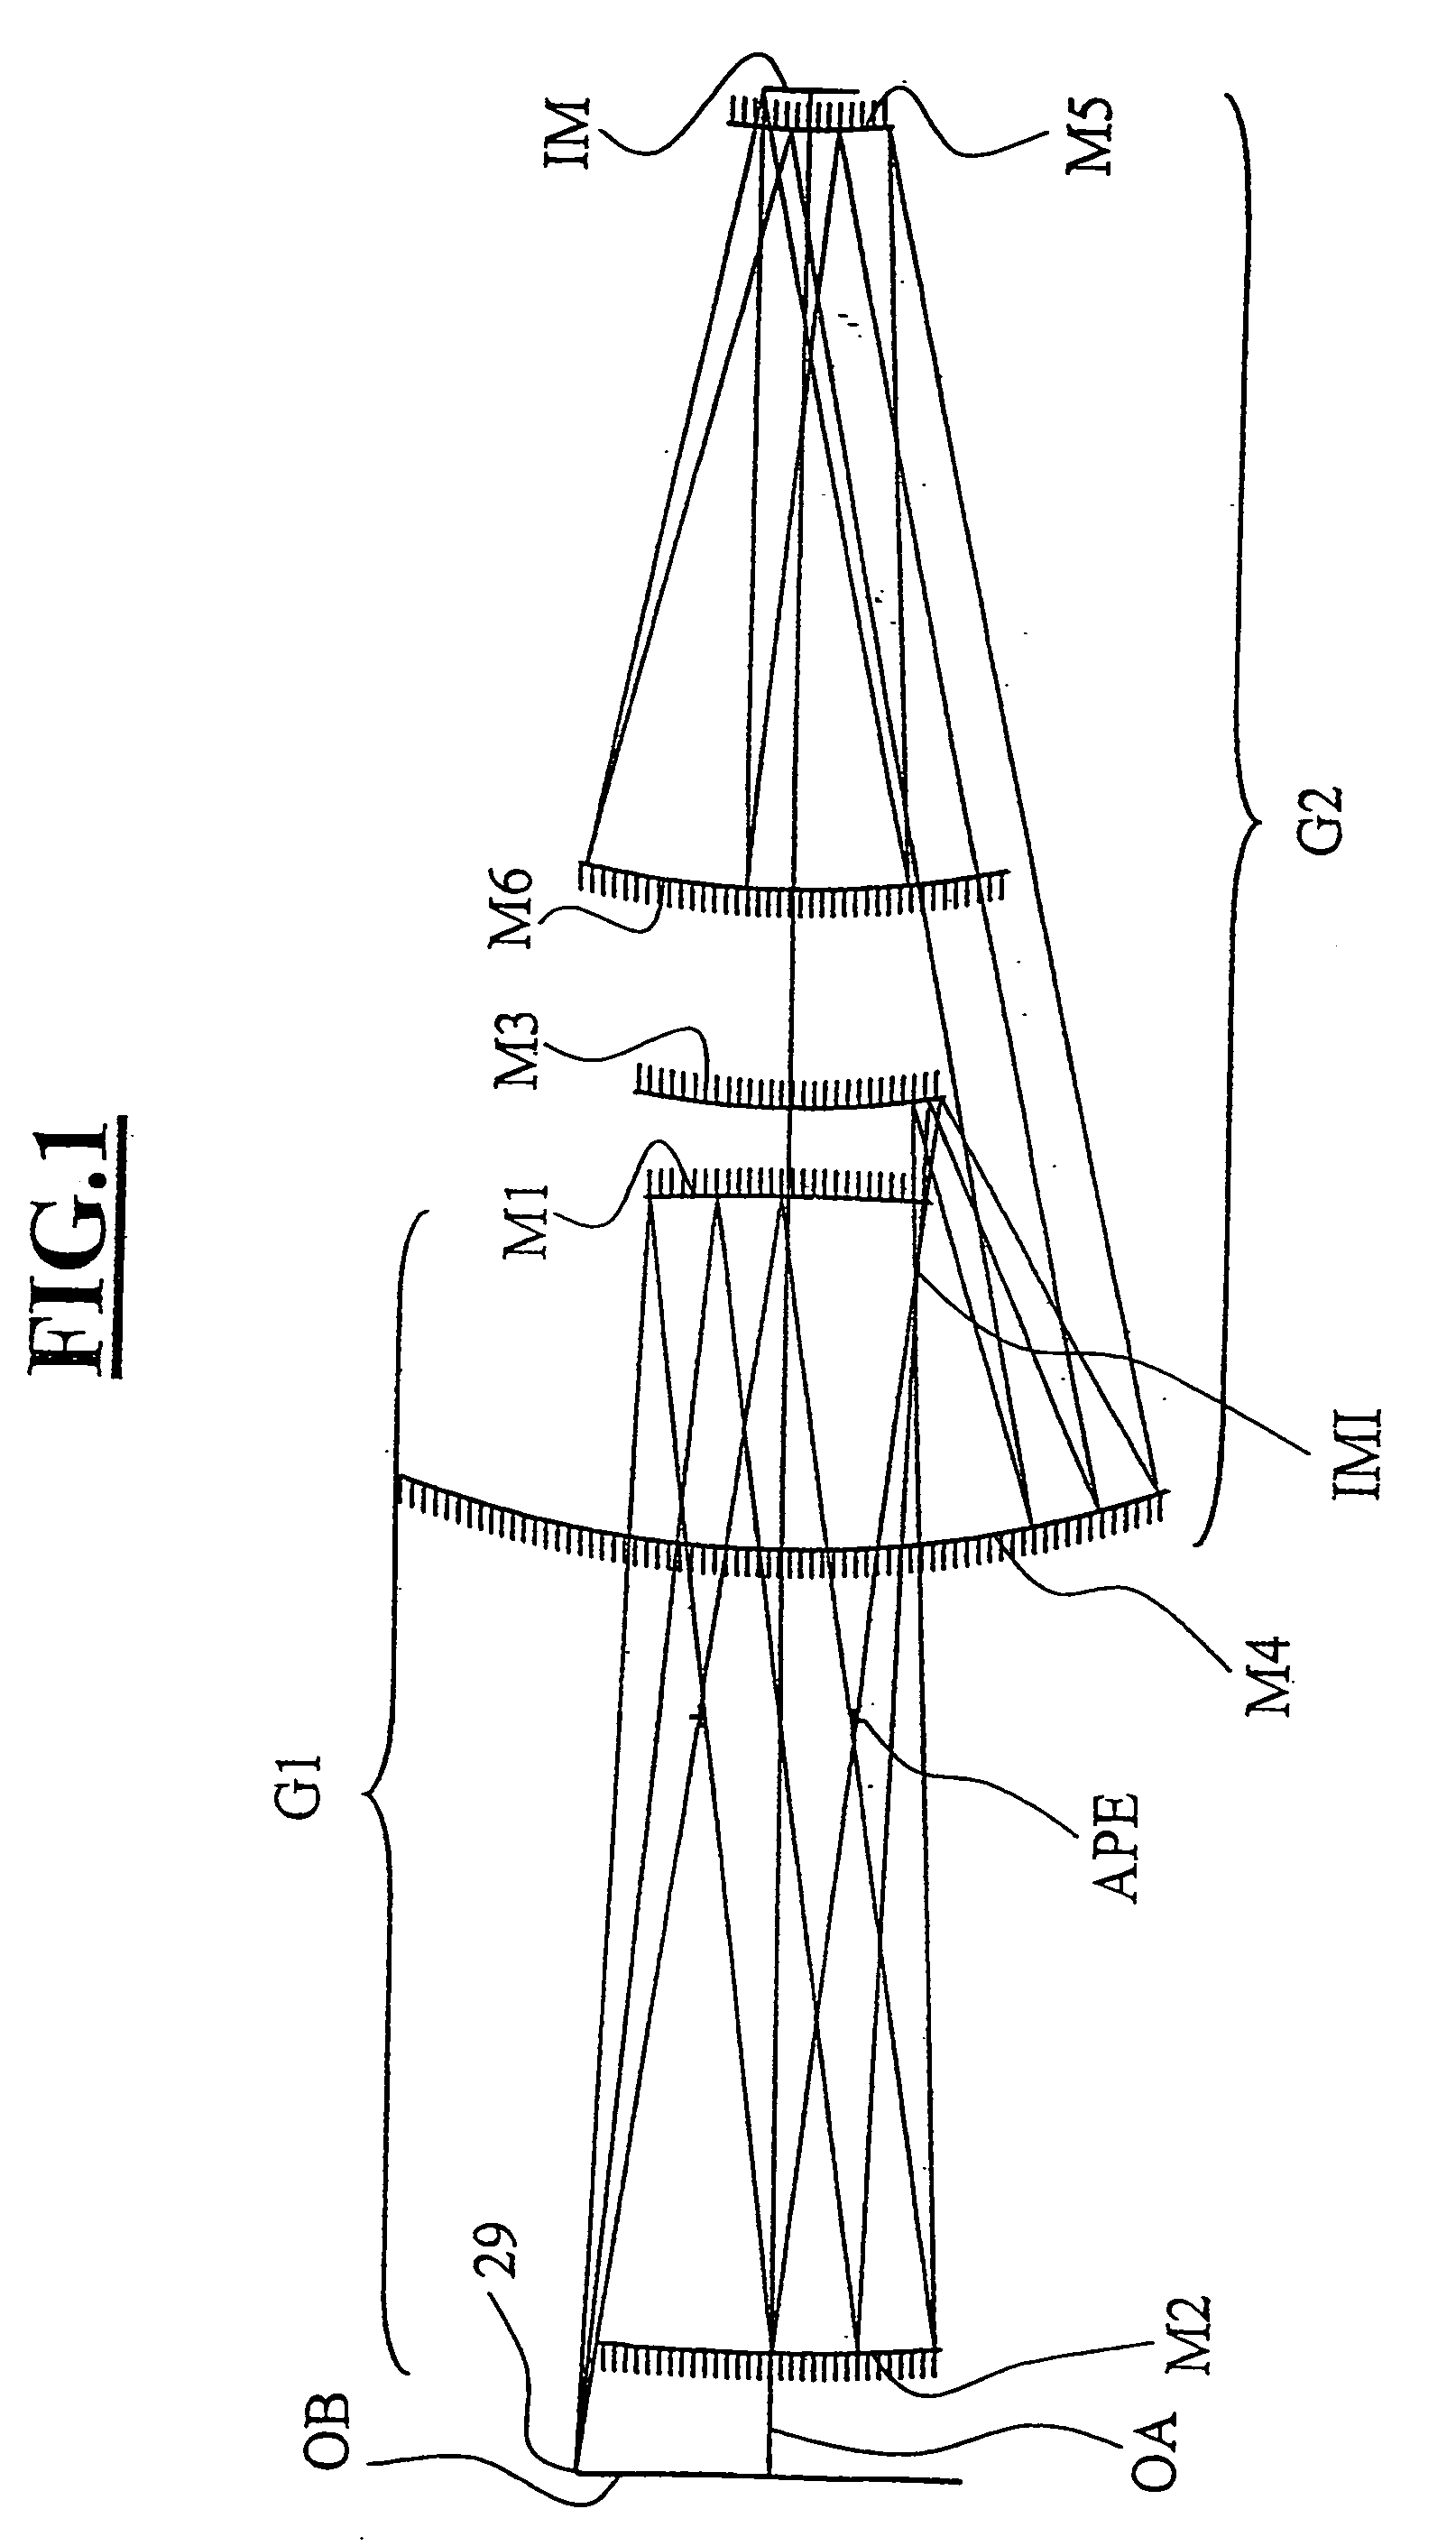 Projection system for EUV lithography